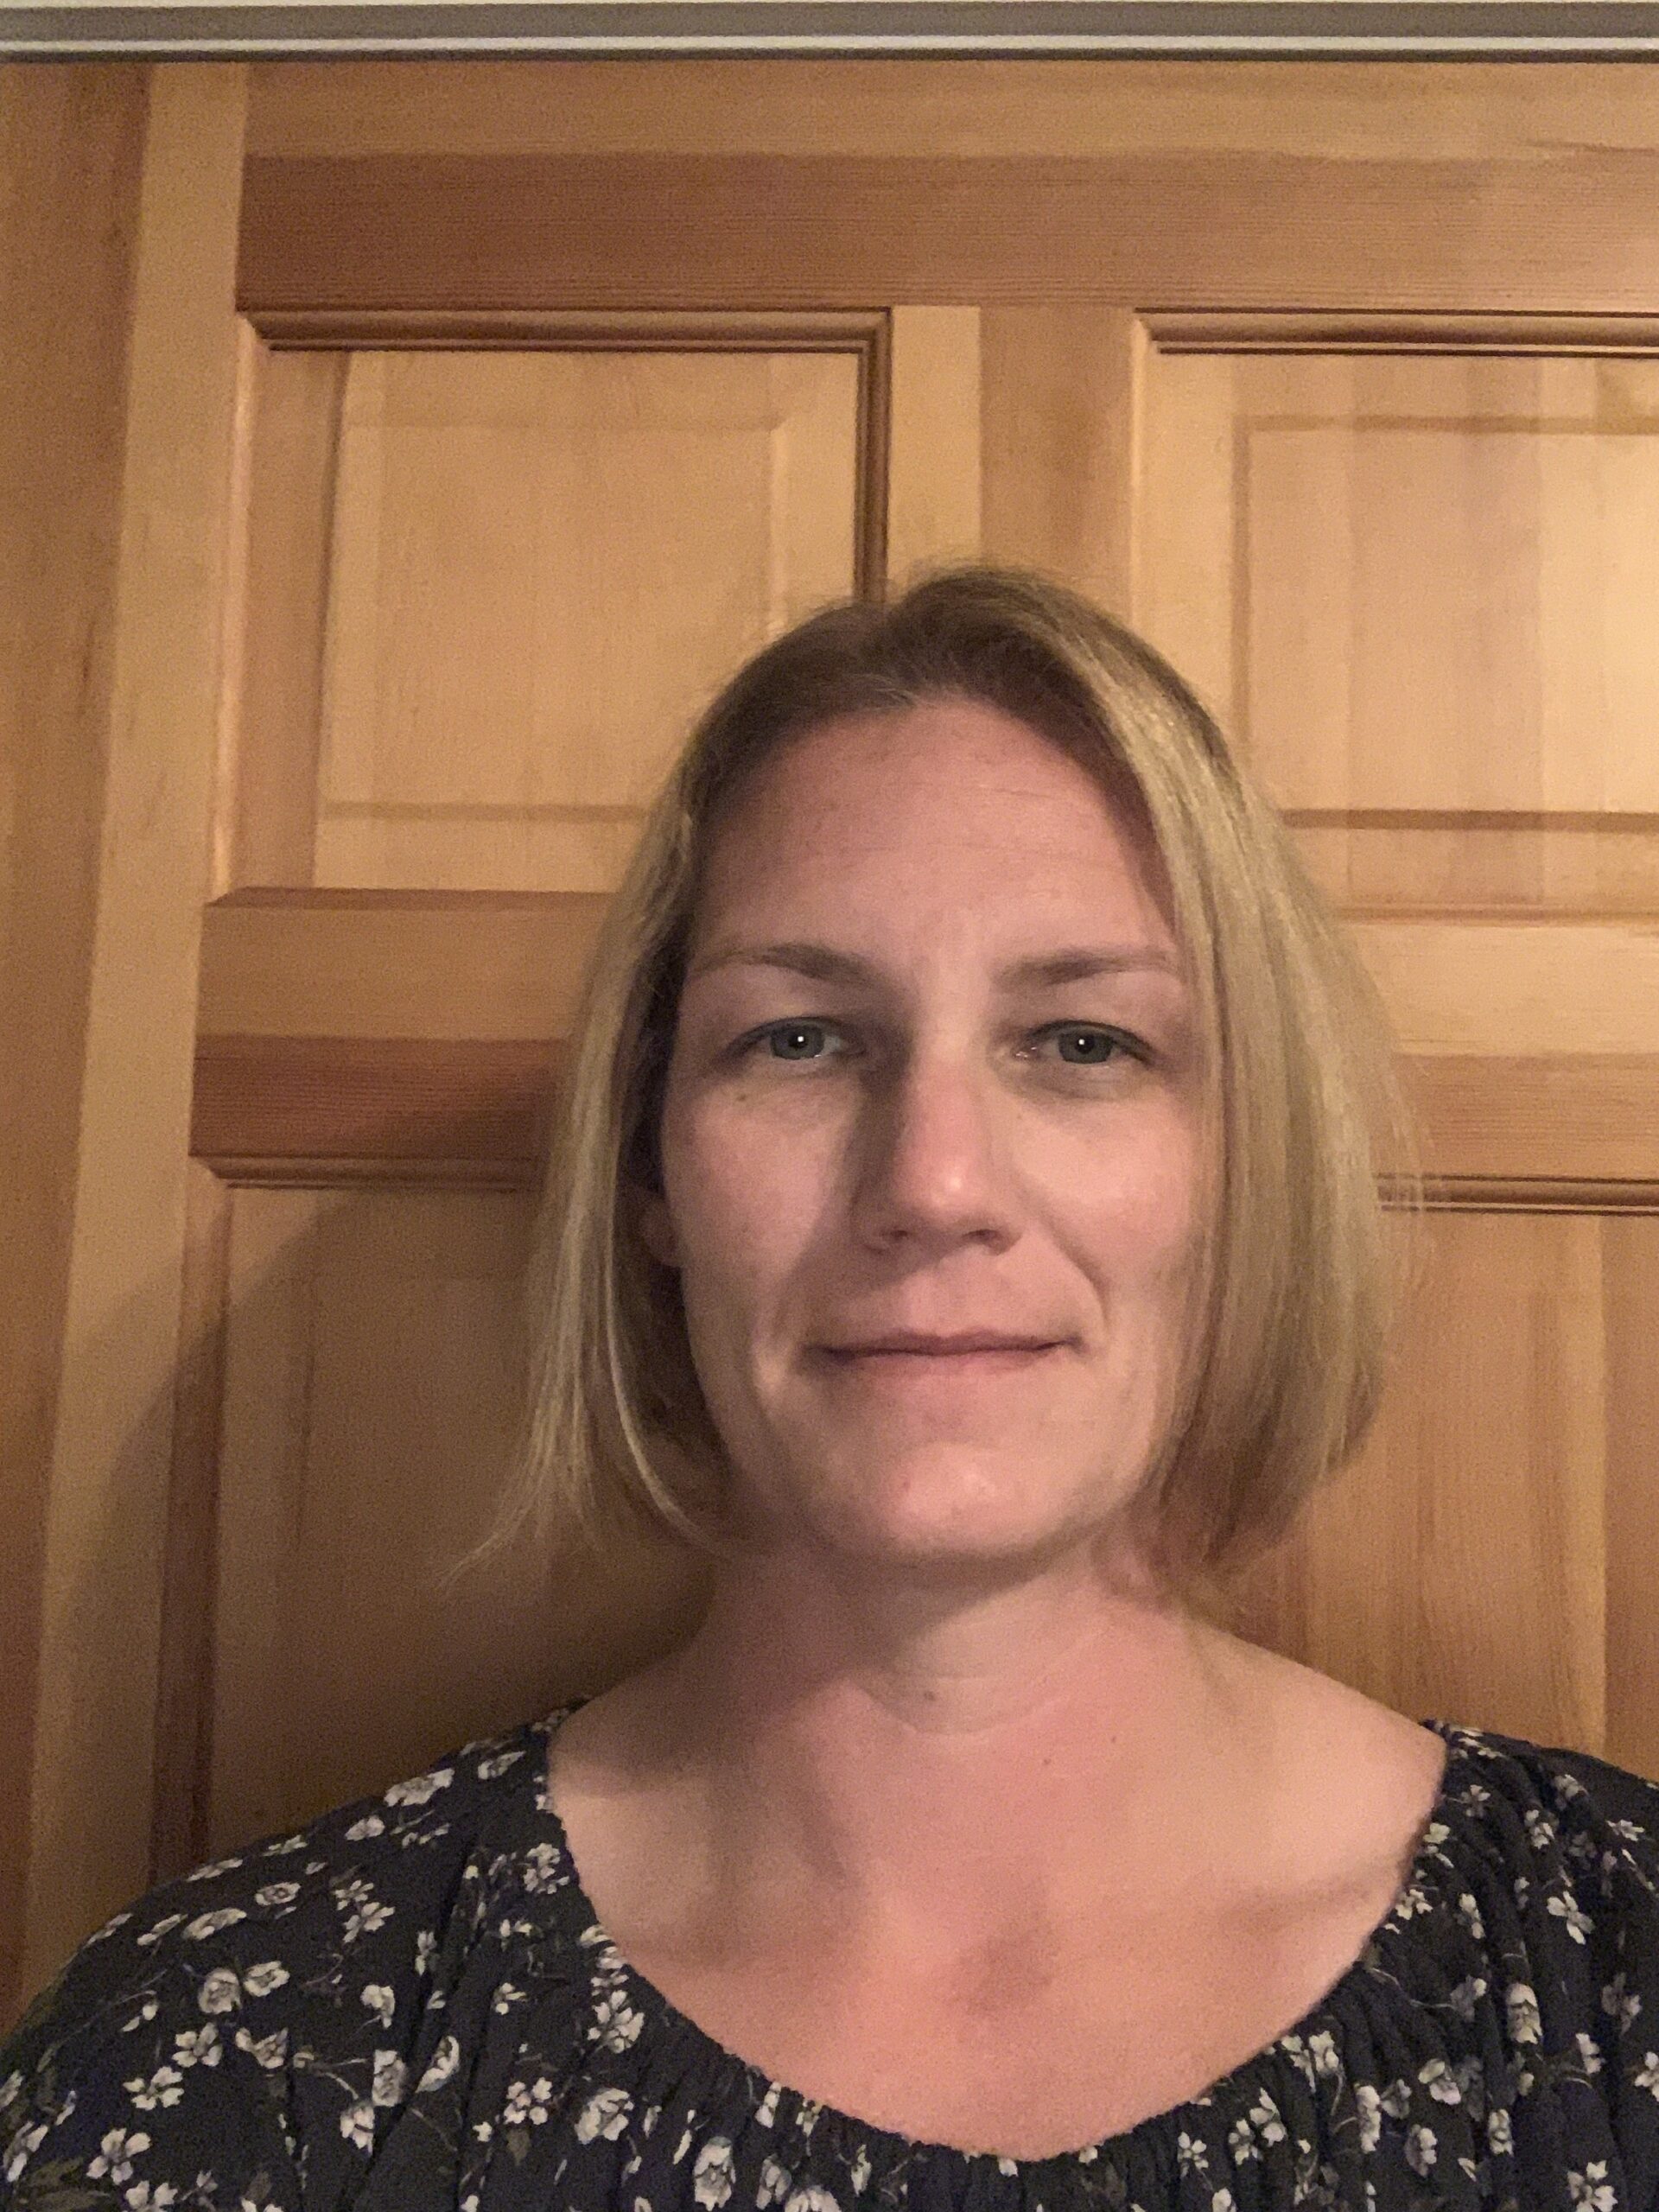 Springs School Athletic Director Whitney Reidlinger is stepping down from her position to focus on her job as the district's occupational therapist. SPRINGS SCHOOL DISTRICT